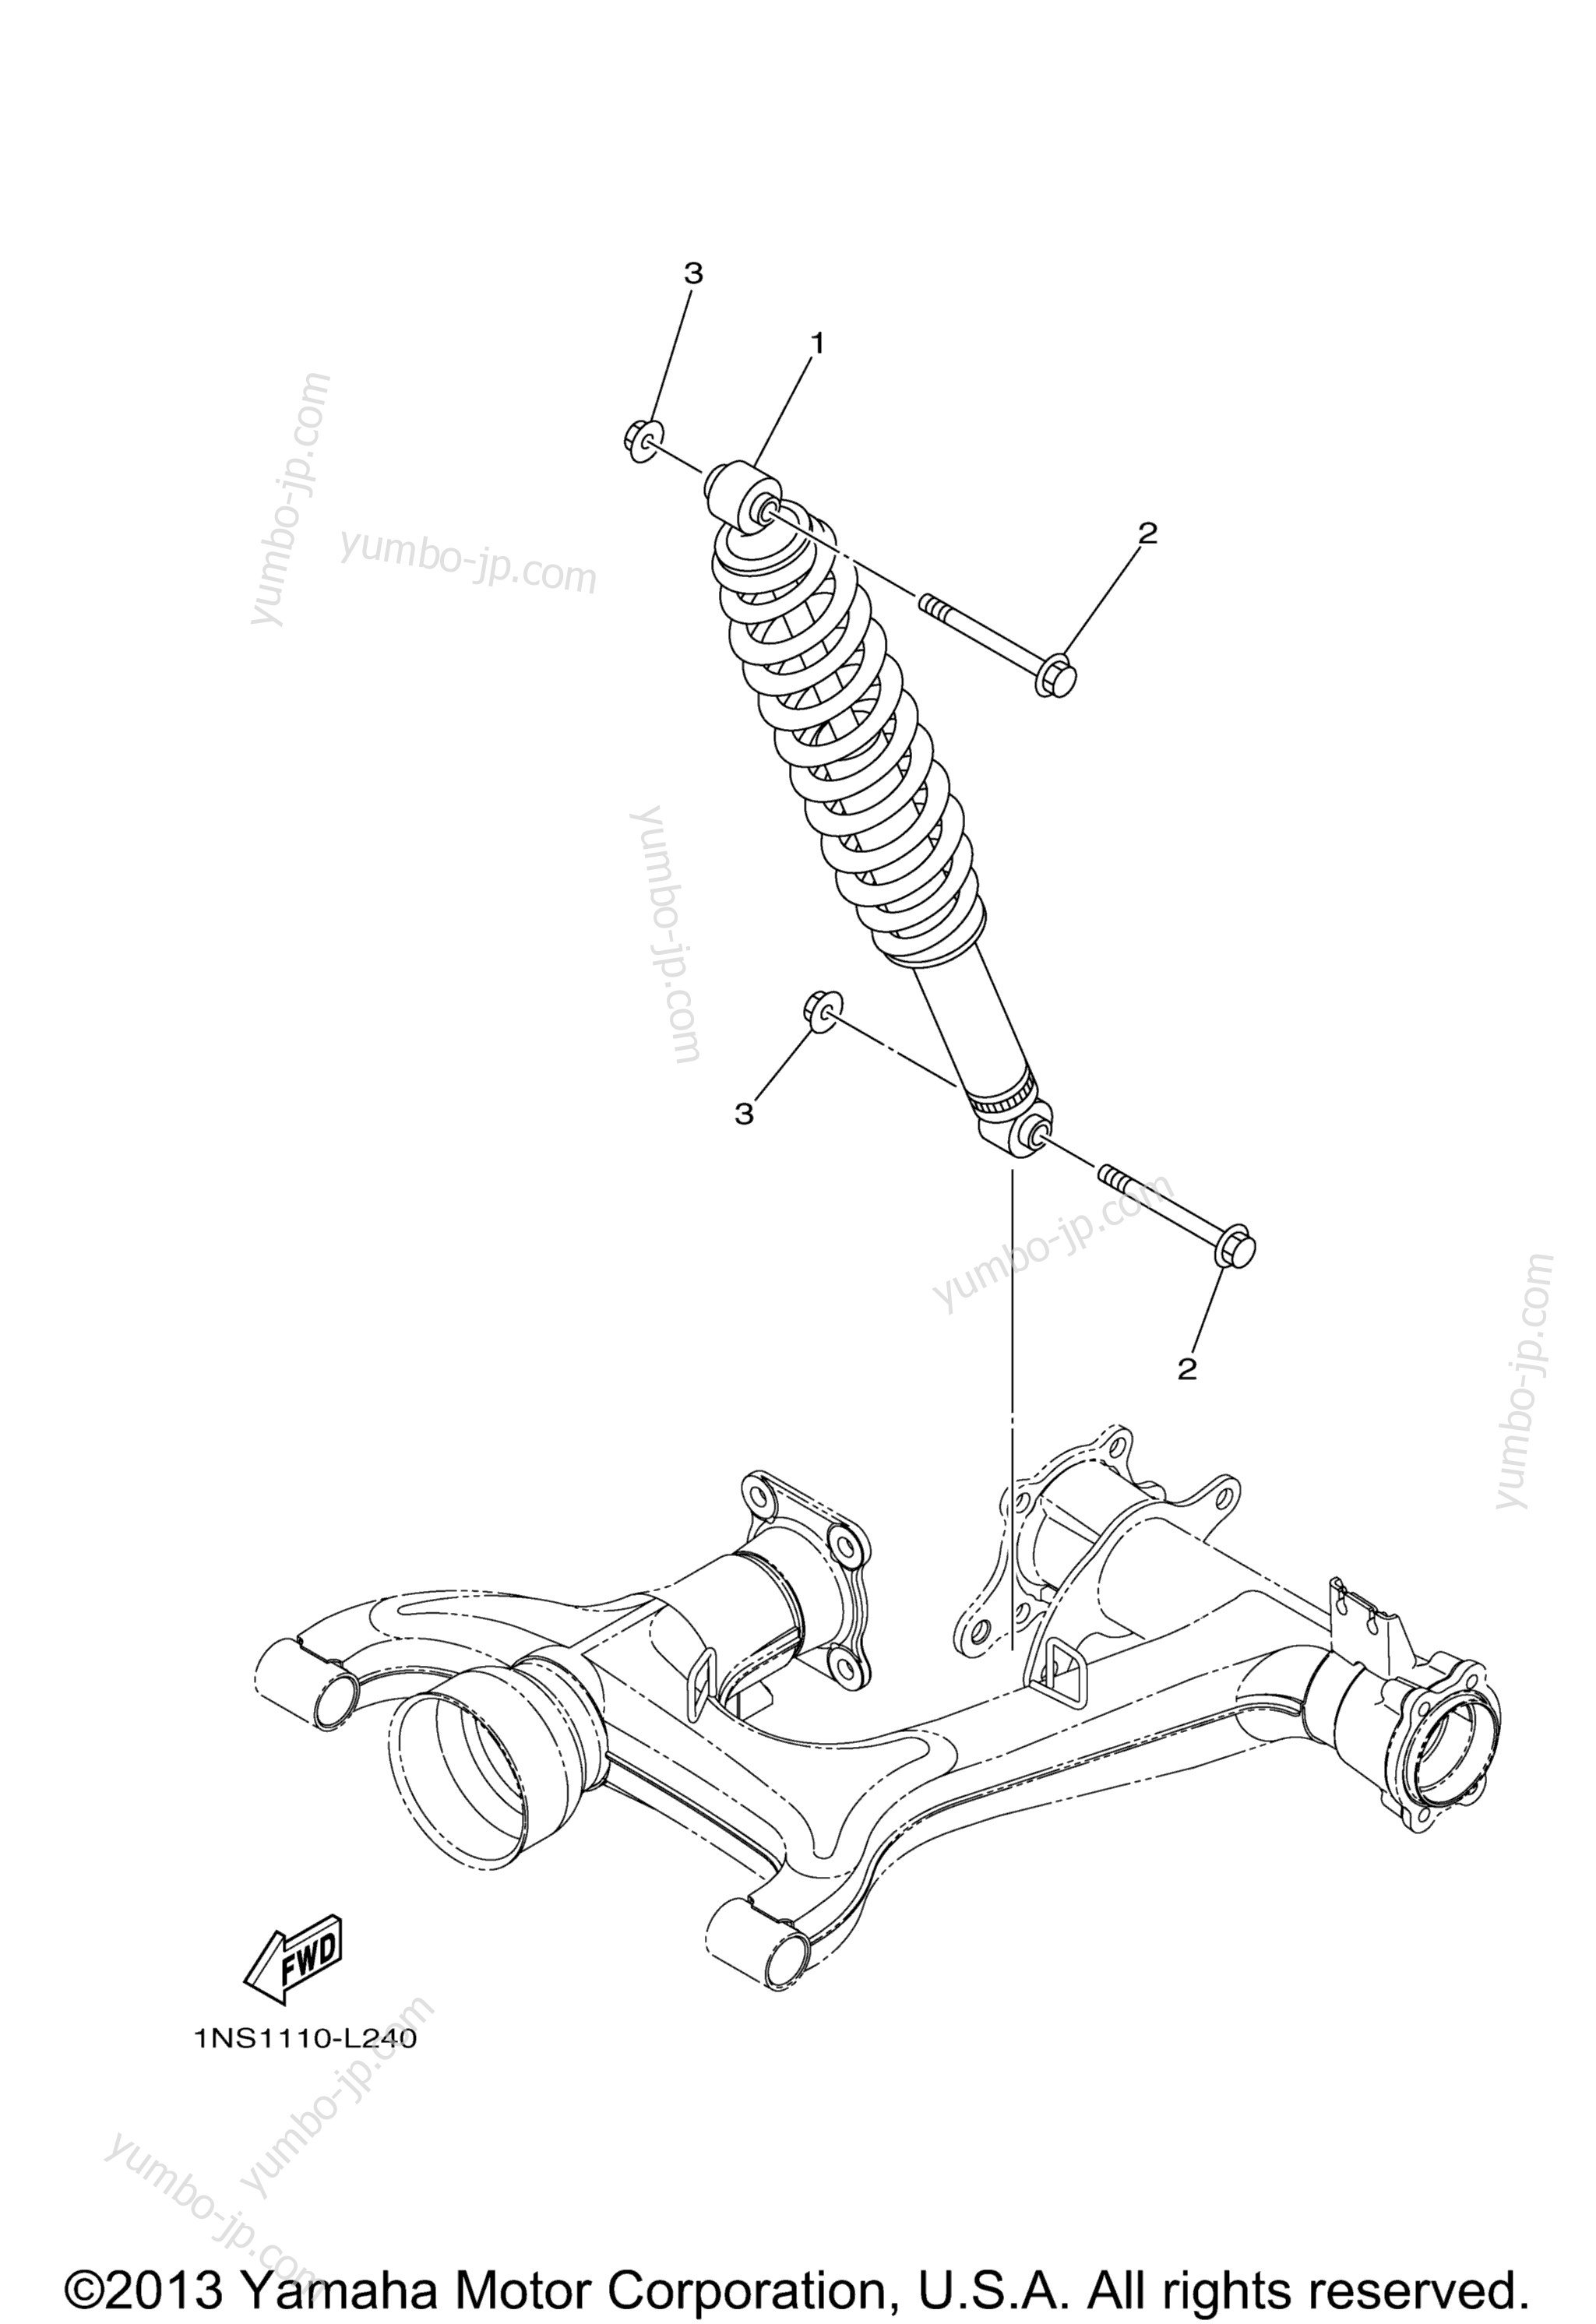 Rear Suspension for ATVs YAMAHA GRIZZLY 350 (YFM350DER) 2014 year